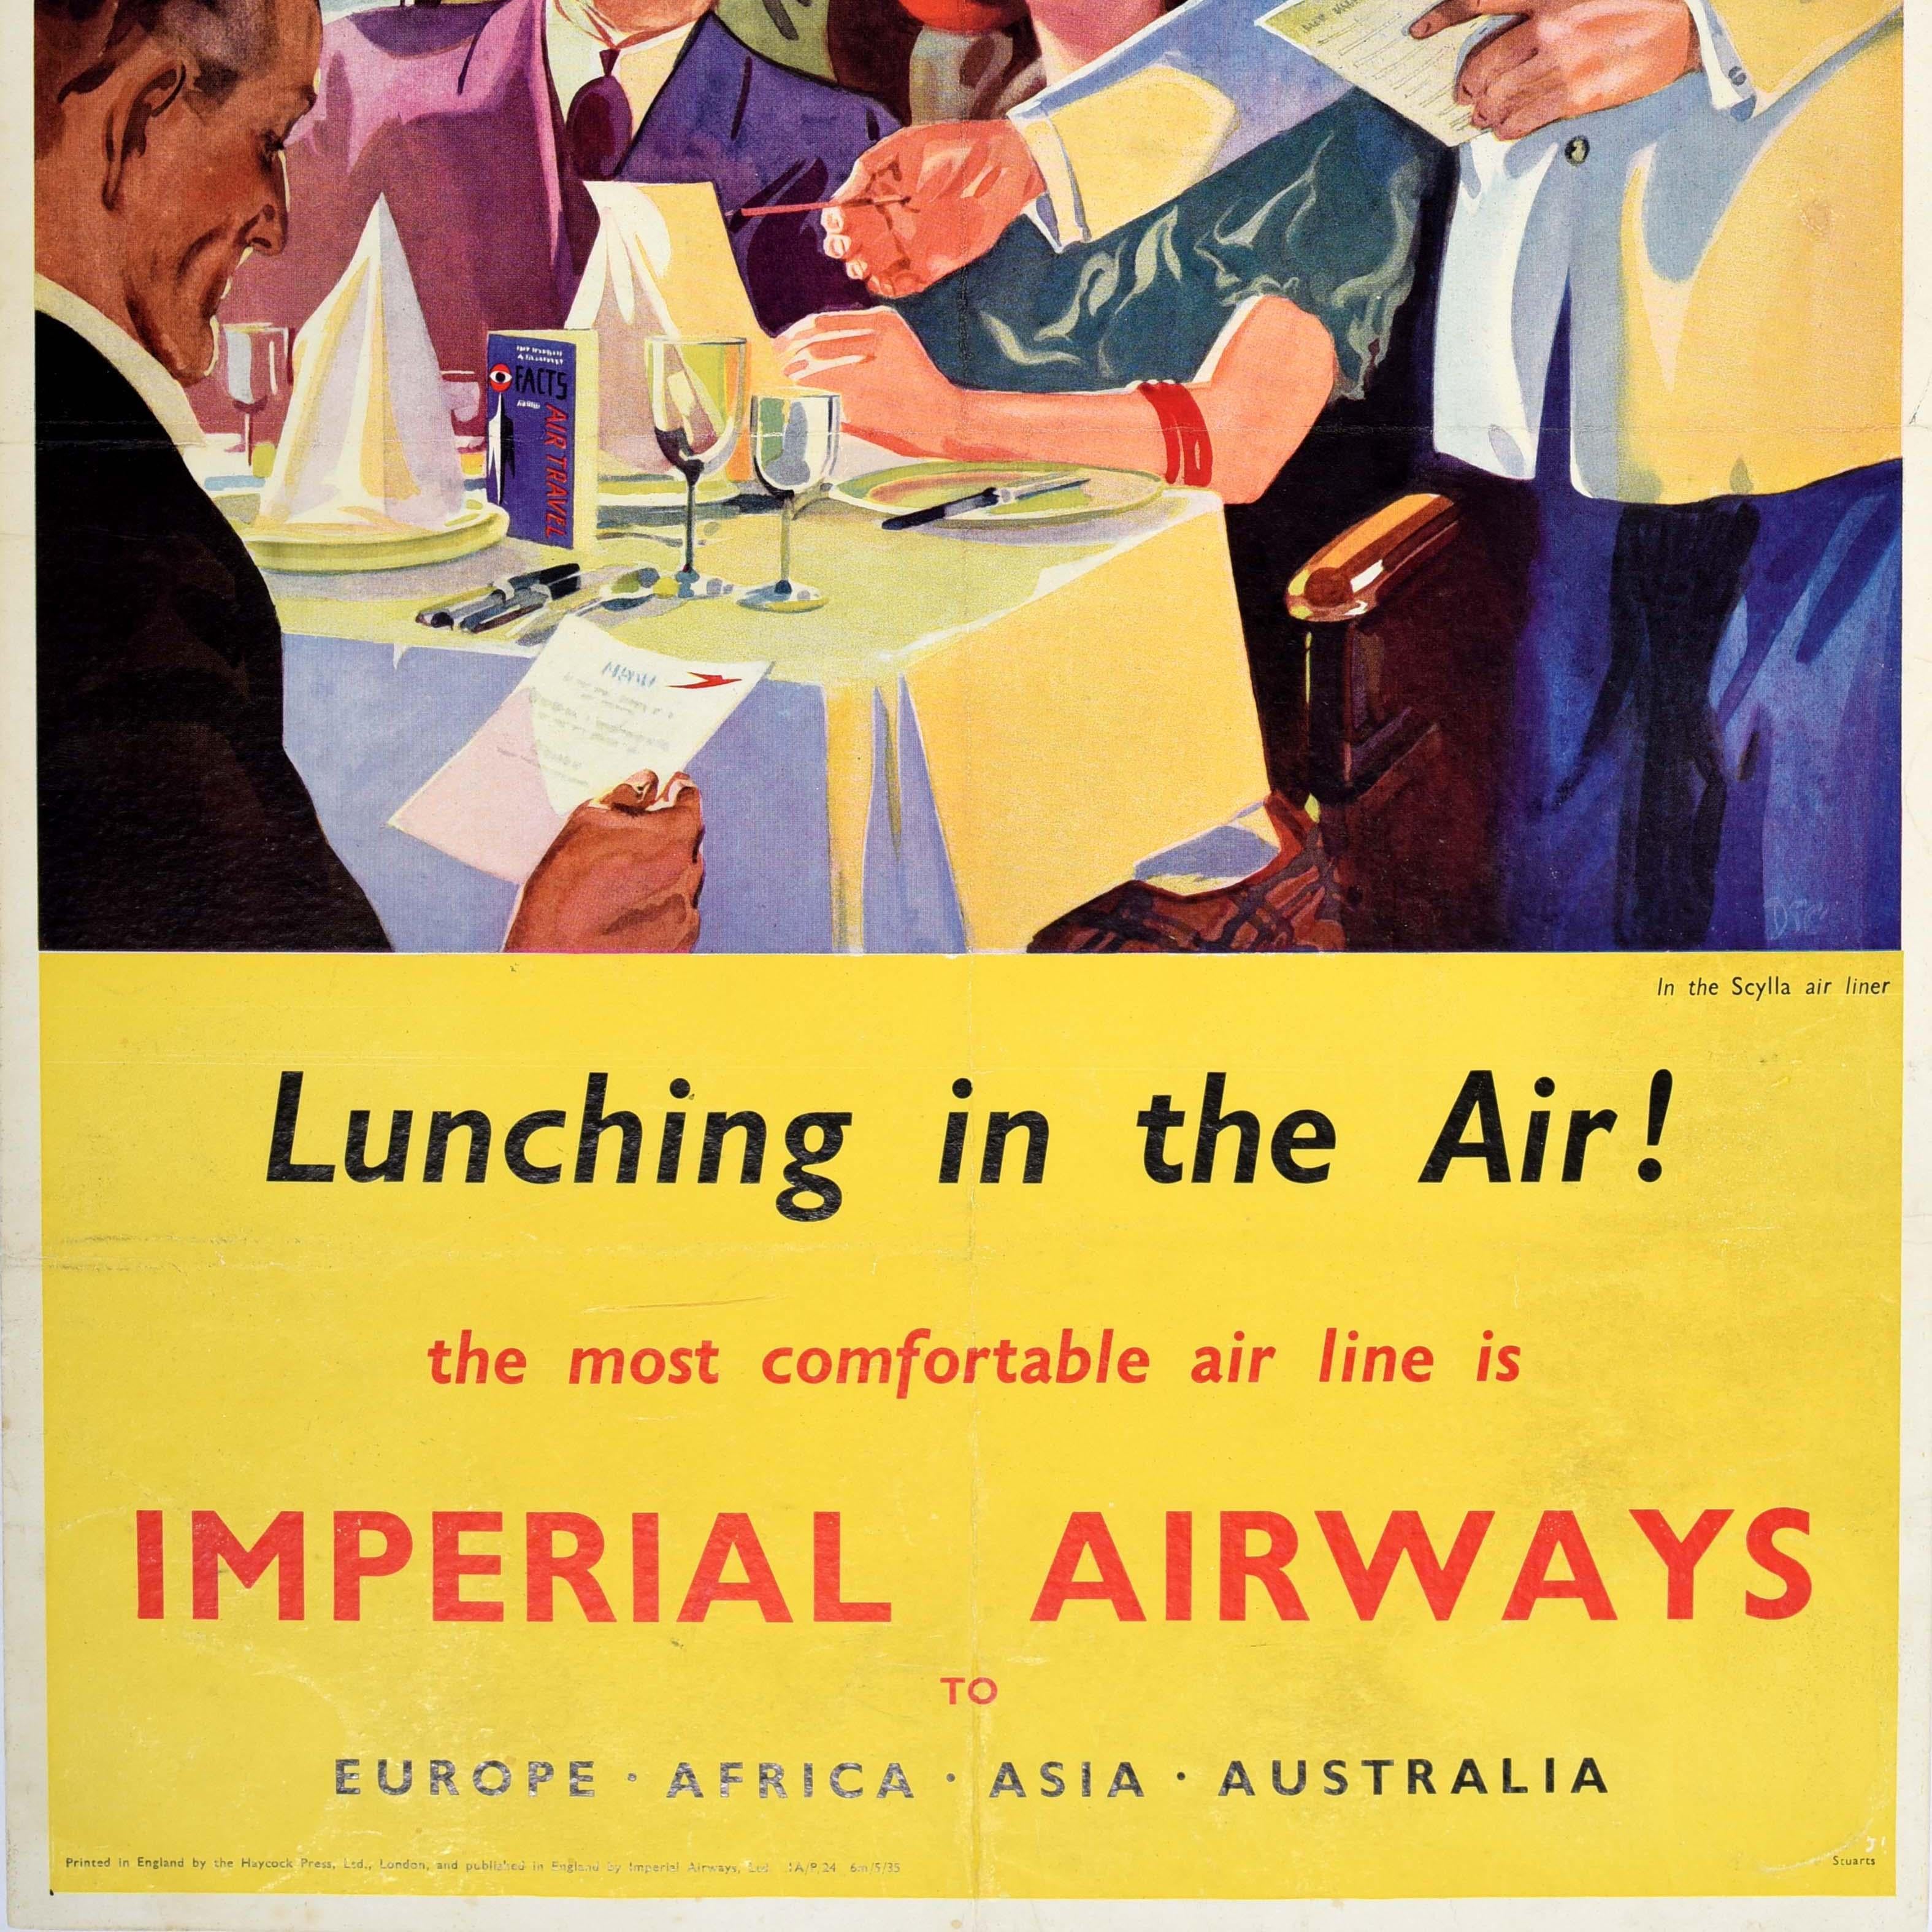 Original vintage travel advertising poster - Imperial Airways Lunching in the Air! The most comfortable air line is Imperial Airways to Europe Africa Asia Australia - featuring a flight attendant waiter taking an order from three smartly dressed